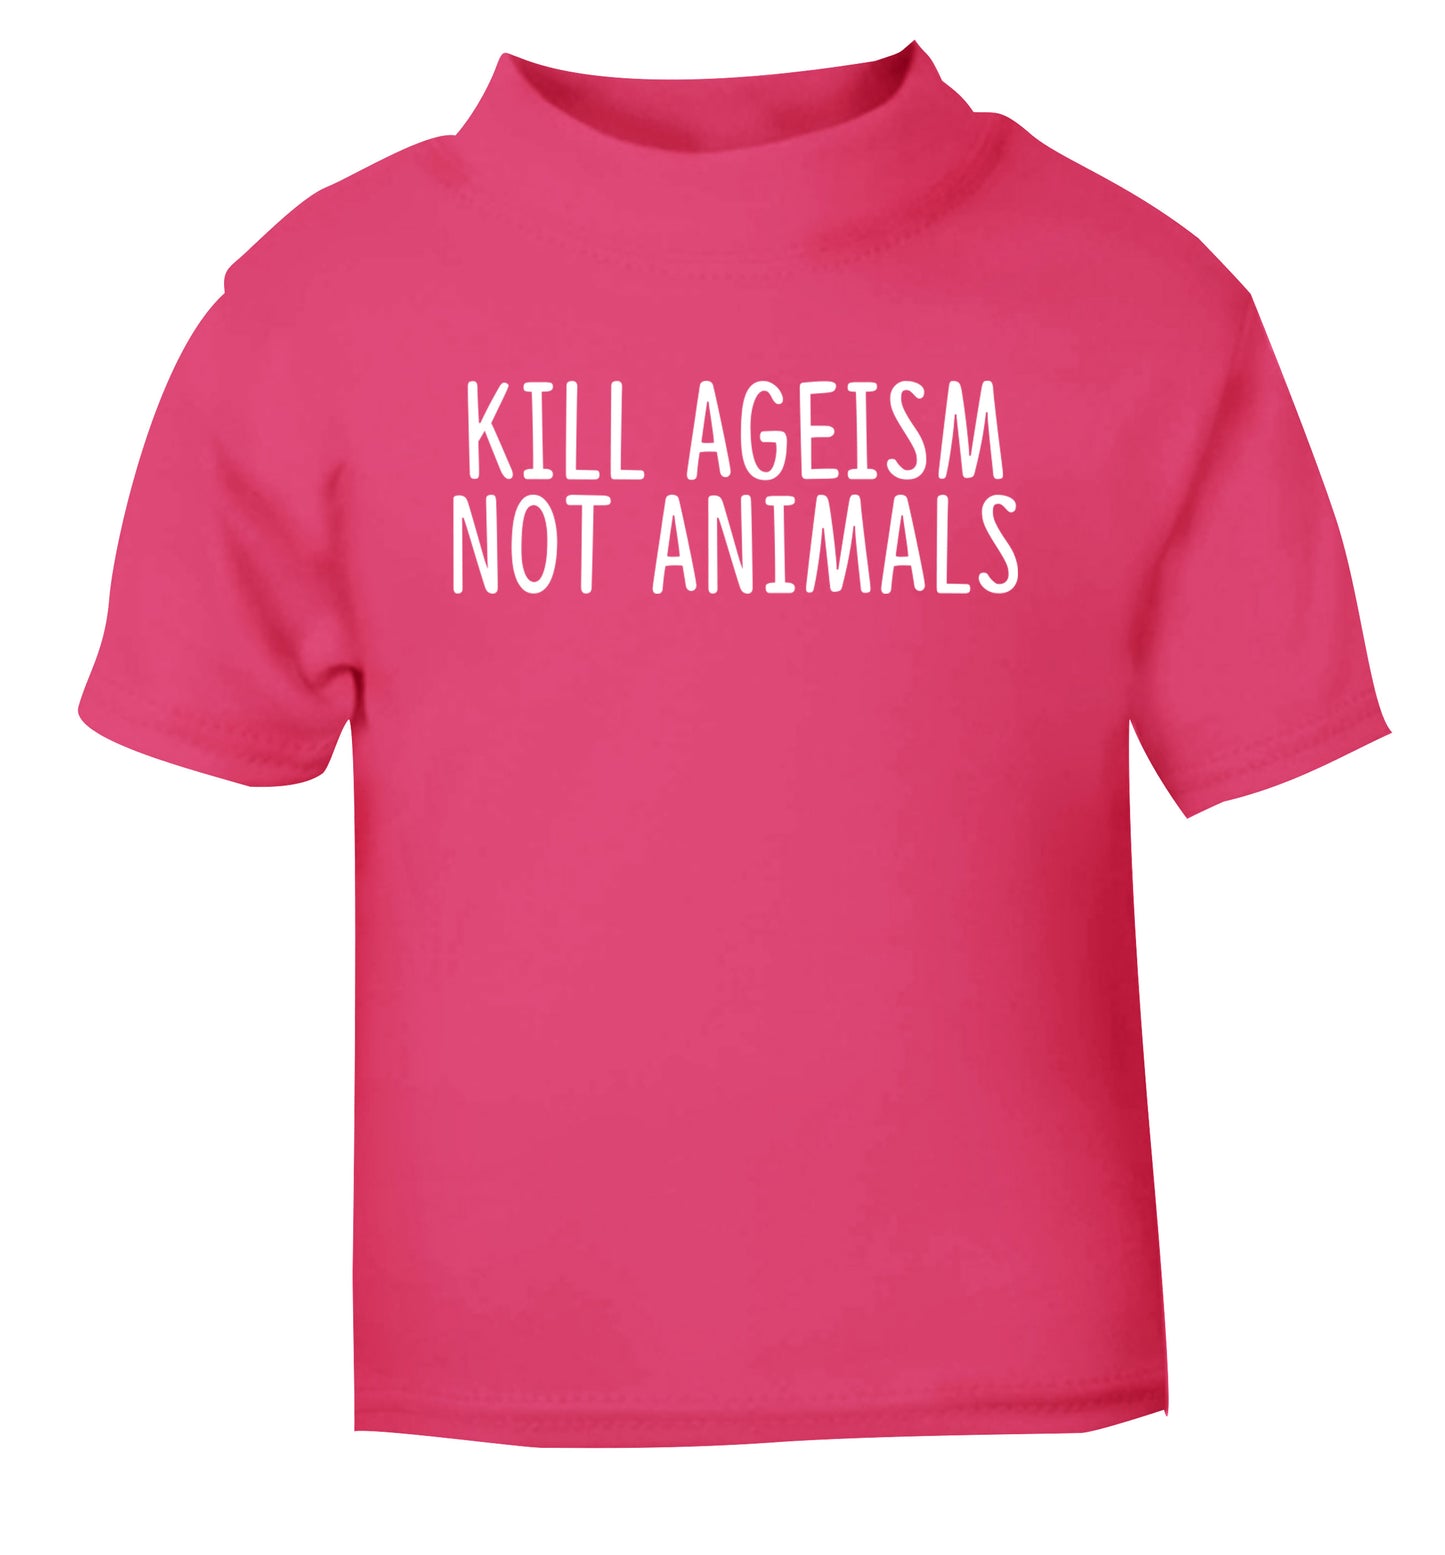 Kill Ageism Not Animals pink Baby Toddler Tshirt 2 Years